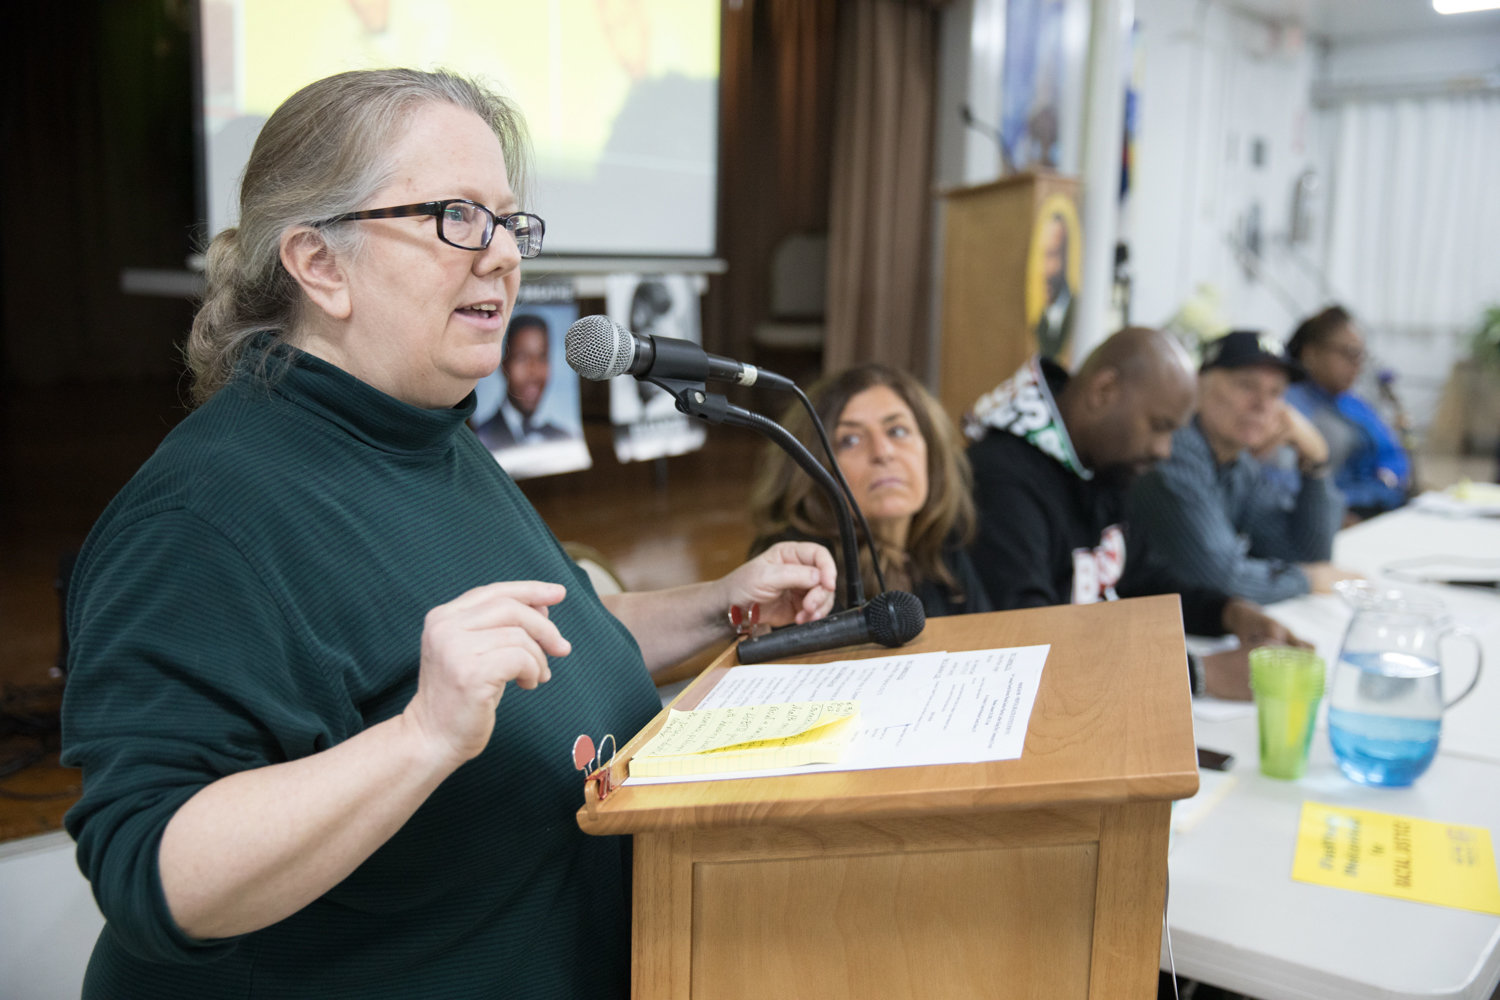 North Bronx Racial Justice member Jennifer Scarlott gives opening remarks at a panel discussion on mental health and police activity in communities of color at St. Stephen’s United Methodist Church on Martin Luther King Jr. Day. Now that in-person events have been canceled or gone virtual, Scarlott is working to adapt to organizing online.